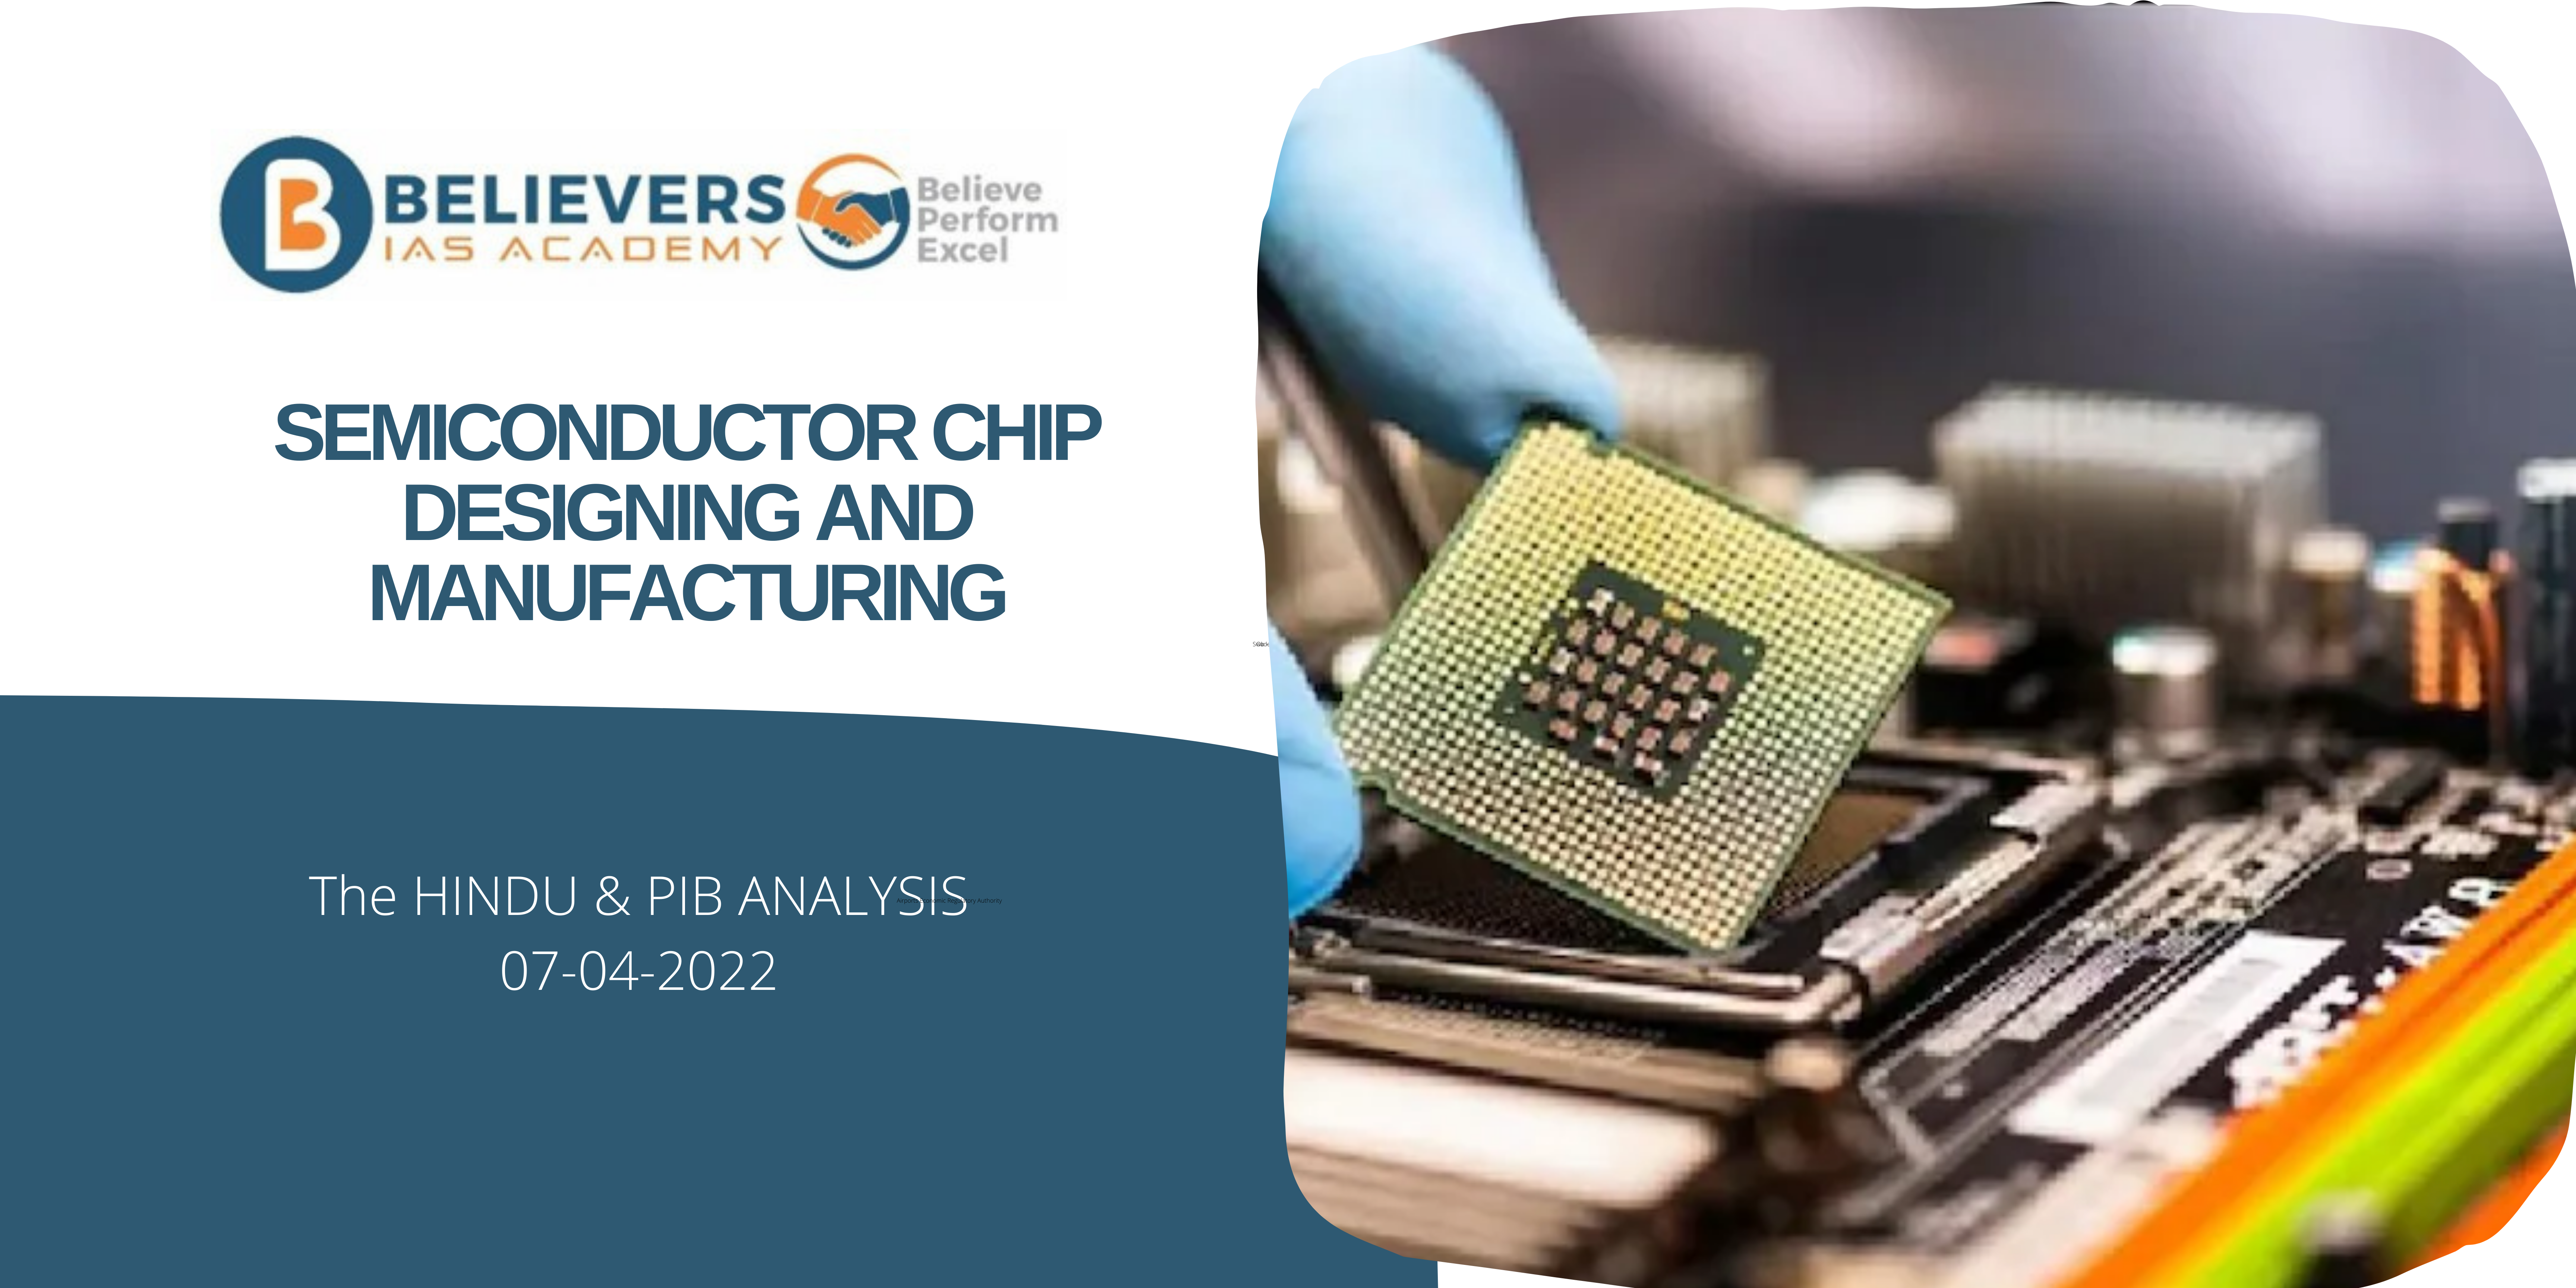 UPSC Current affairs - Semiconductor Chip Designing and Manufacturing